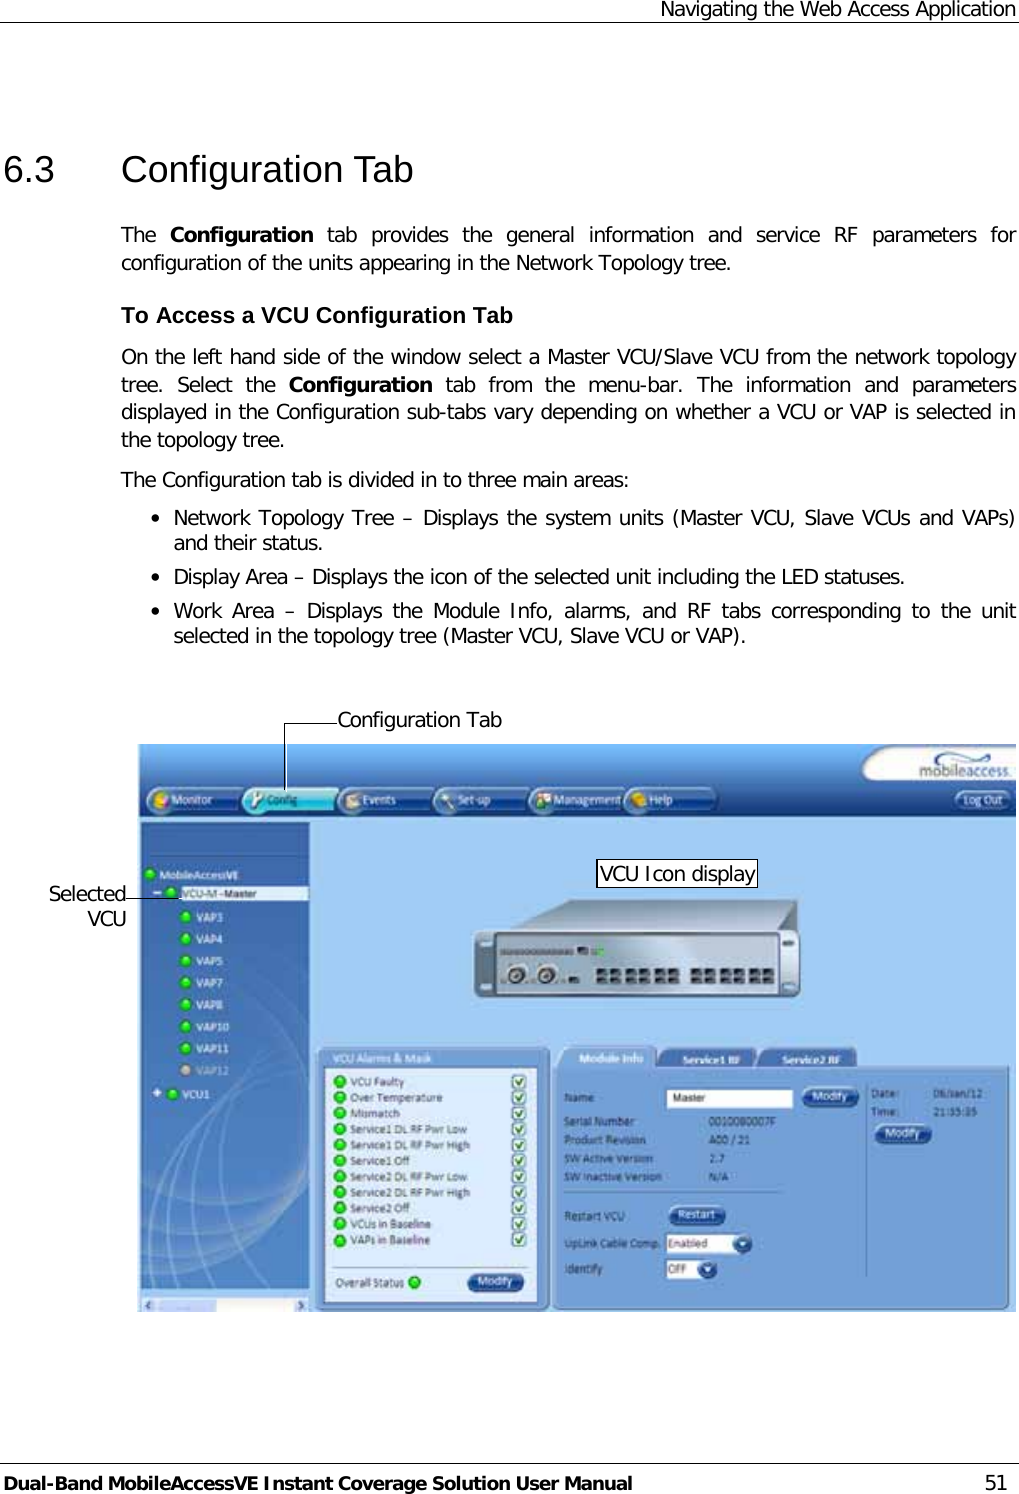 Navigating the Web Access Application Dual-Band MobileAccessVE Instant Coverage Solution User Manual 51  6.3  Configuration Tab The  Configuration  tab  provides the general information and service  RF parameters for configuration of the units appearing in the Network Topology tree.  To Access a VCU Configuration Tab On the left hand side of the window select a Master VCU/Slave VCU from the network topology tree.  Select the  Configuration  tab from the menu-bar.  The information and parameters displayed in the Configuration sub-tabs vary depending on whether a VCU or VAP is selected in the topology tree. The Configuration tab is divided in to three main areas: · Network Topology Tree – Displays the system units (Master VCU, Slave VCUs and VAPs) and their status. · Display Area – Displays the icon of the selected unit including the LED statuses. · Work  Area  –  Displays the Module Info, alarms,  and RF tabs corresponding to the unit selected in the topology tree (Master VCU, Slave VCU or VAP).     Selected VCU VCU Icon display Configuration Tab  